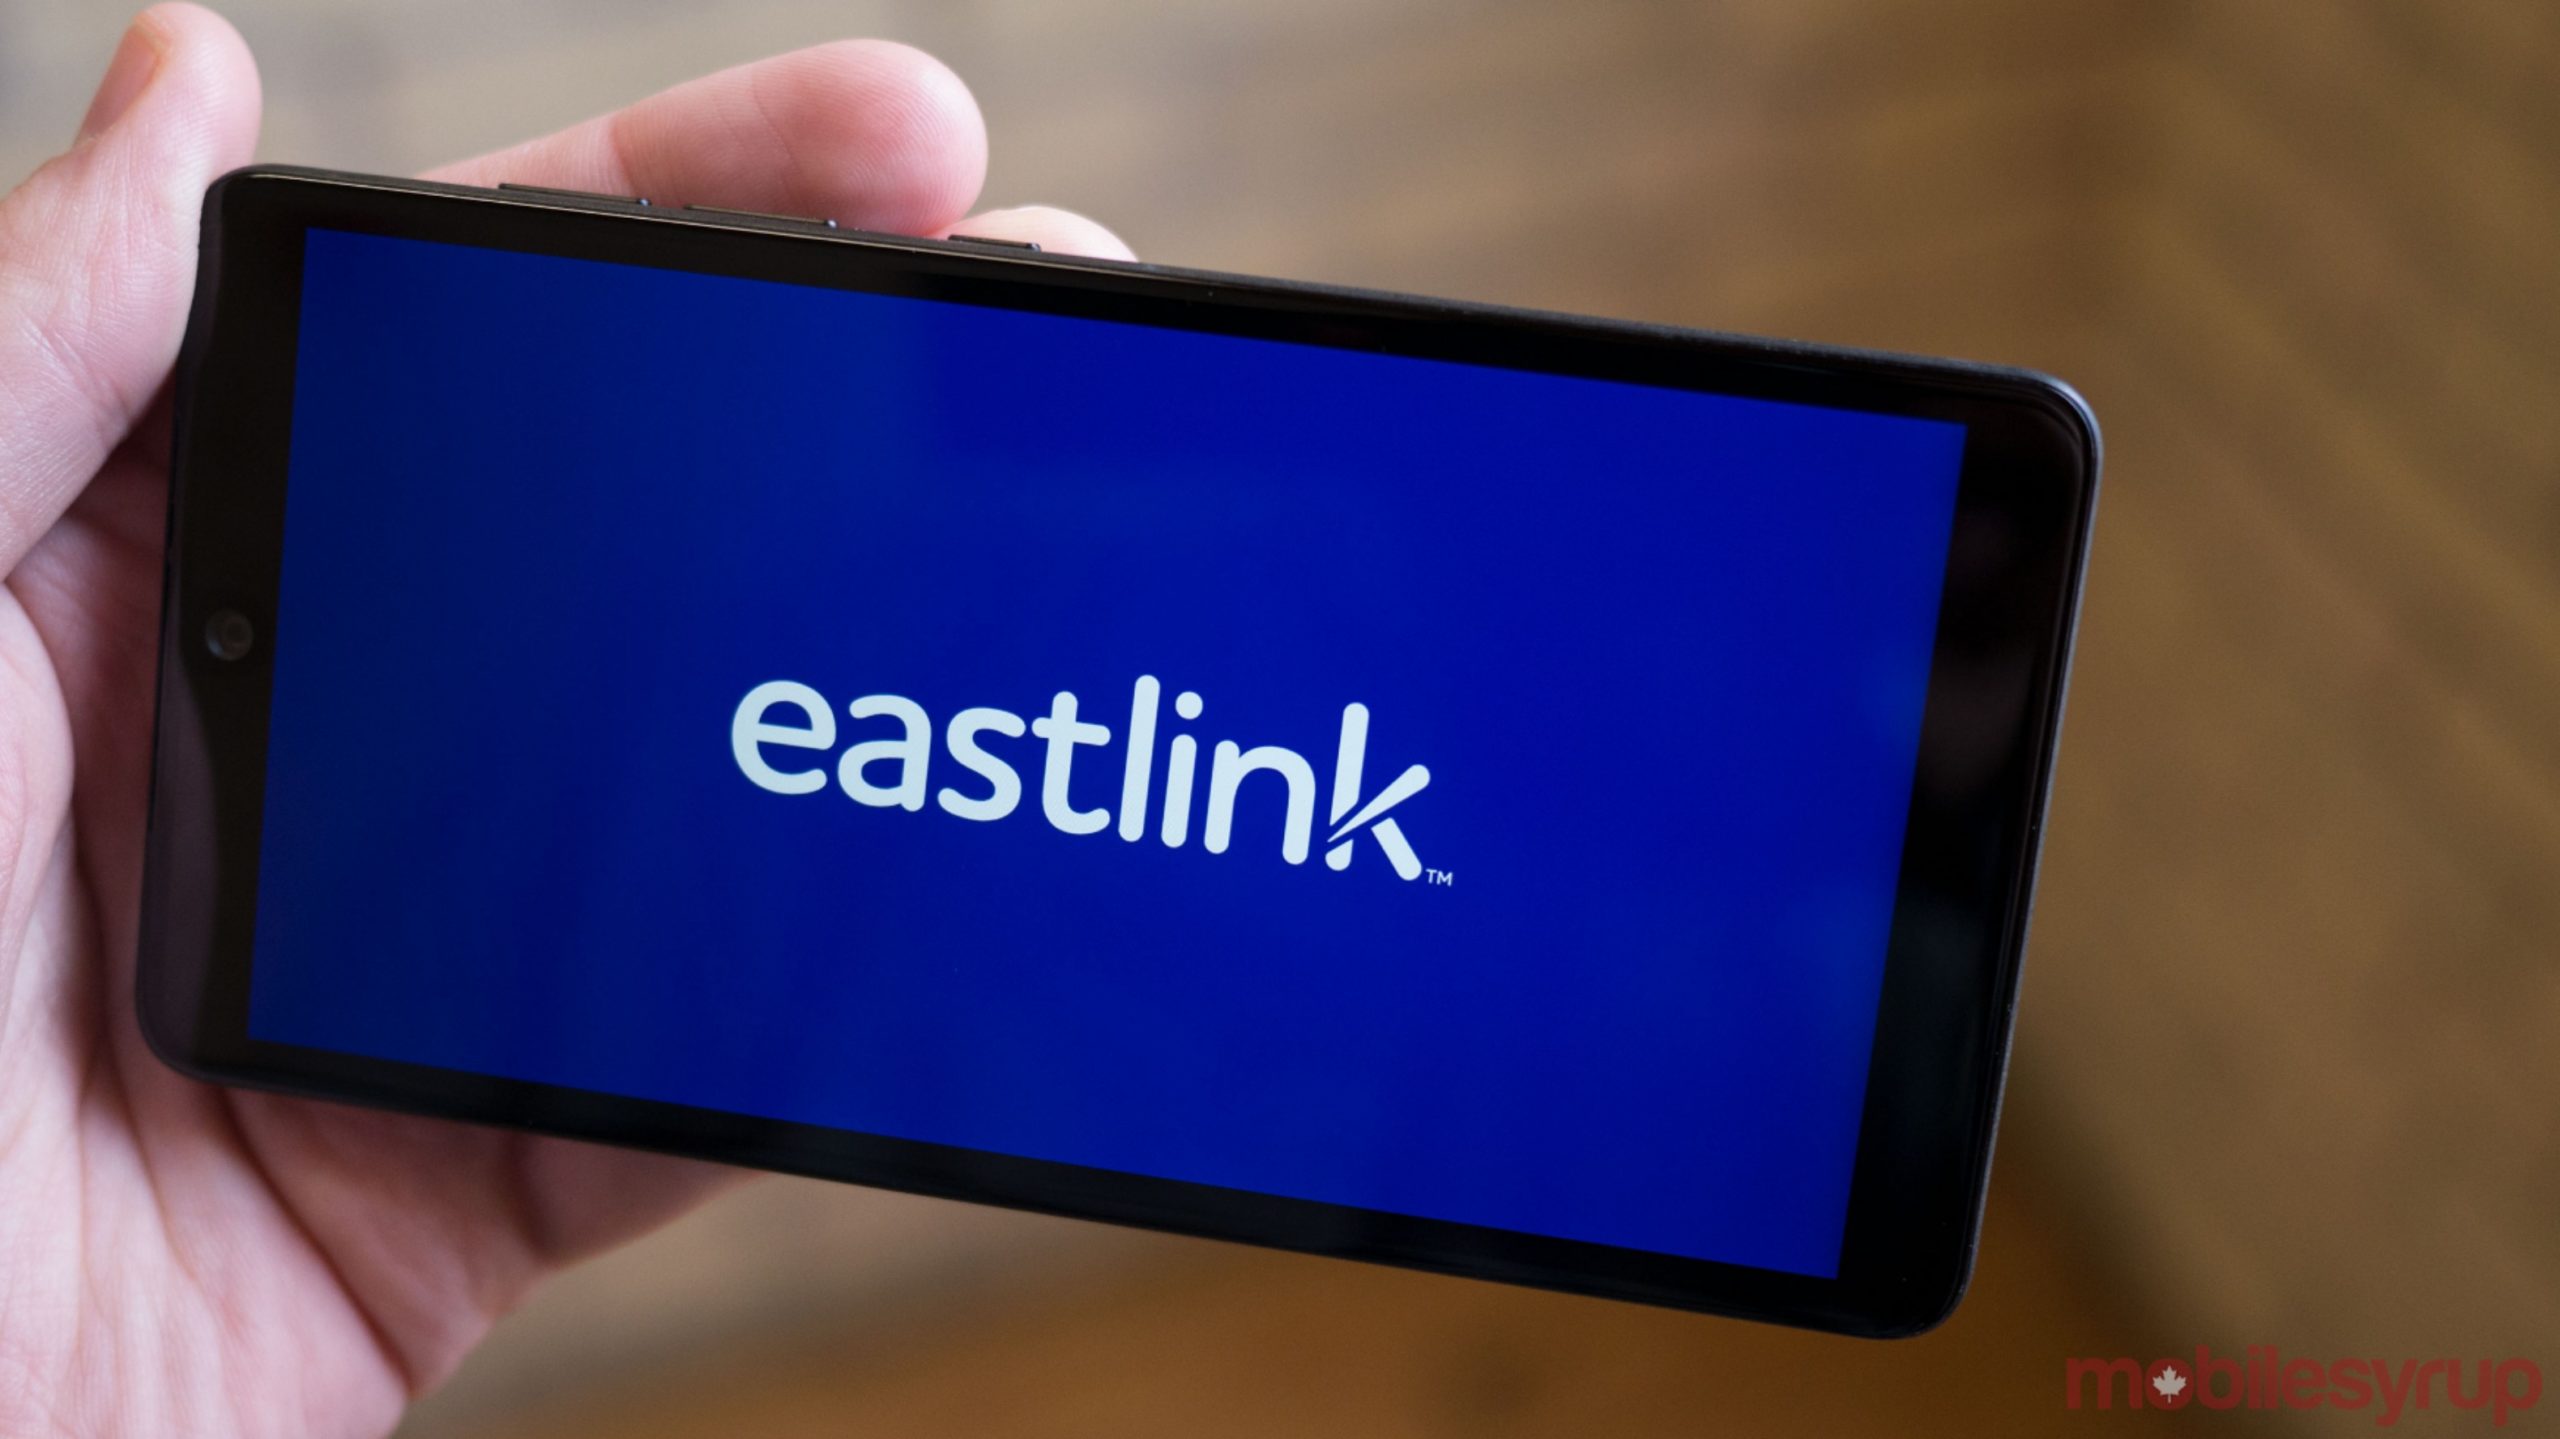 Eastlink launches simplified TV viewing experience powered by TiVo